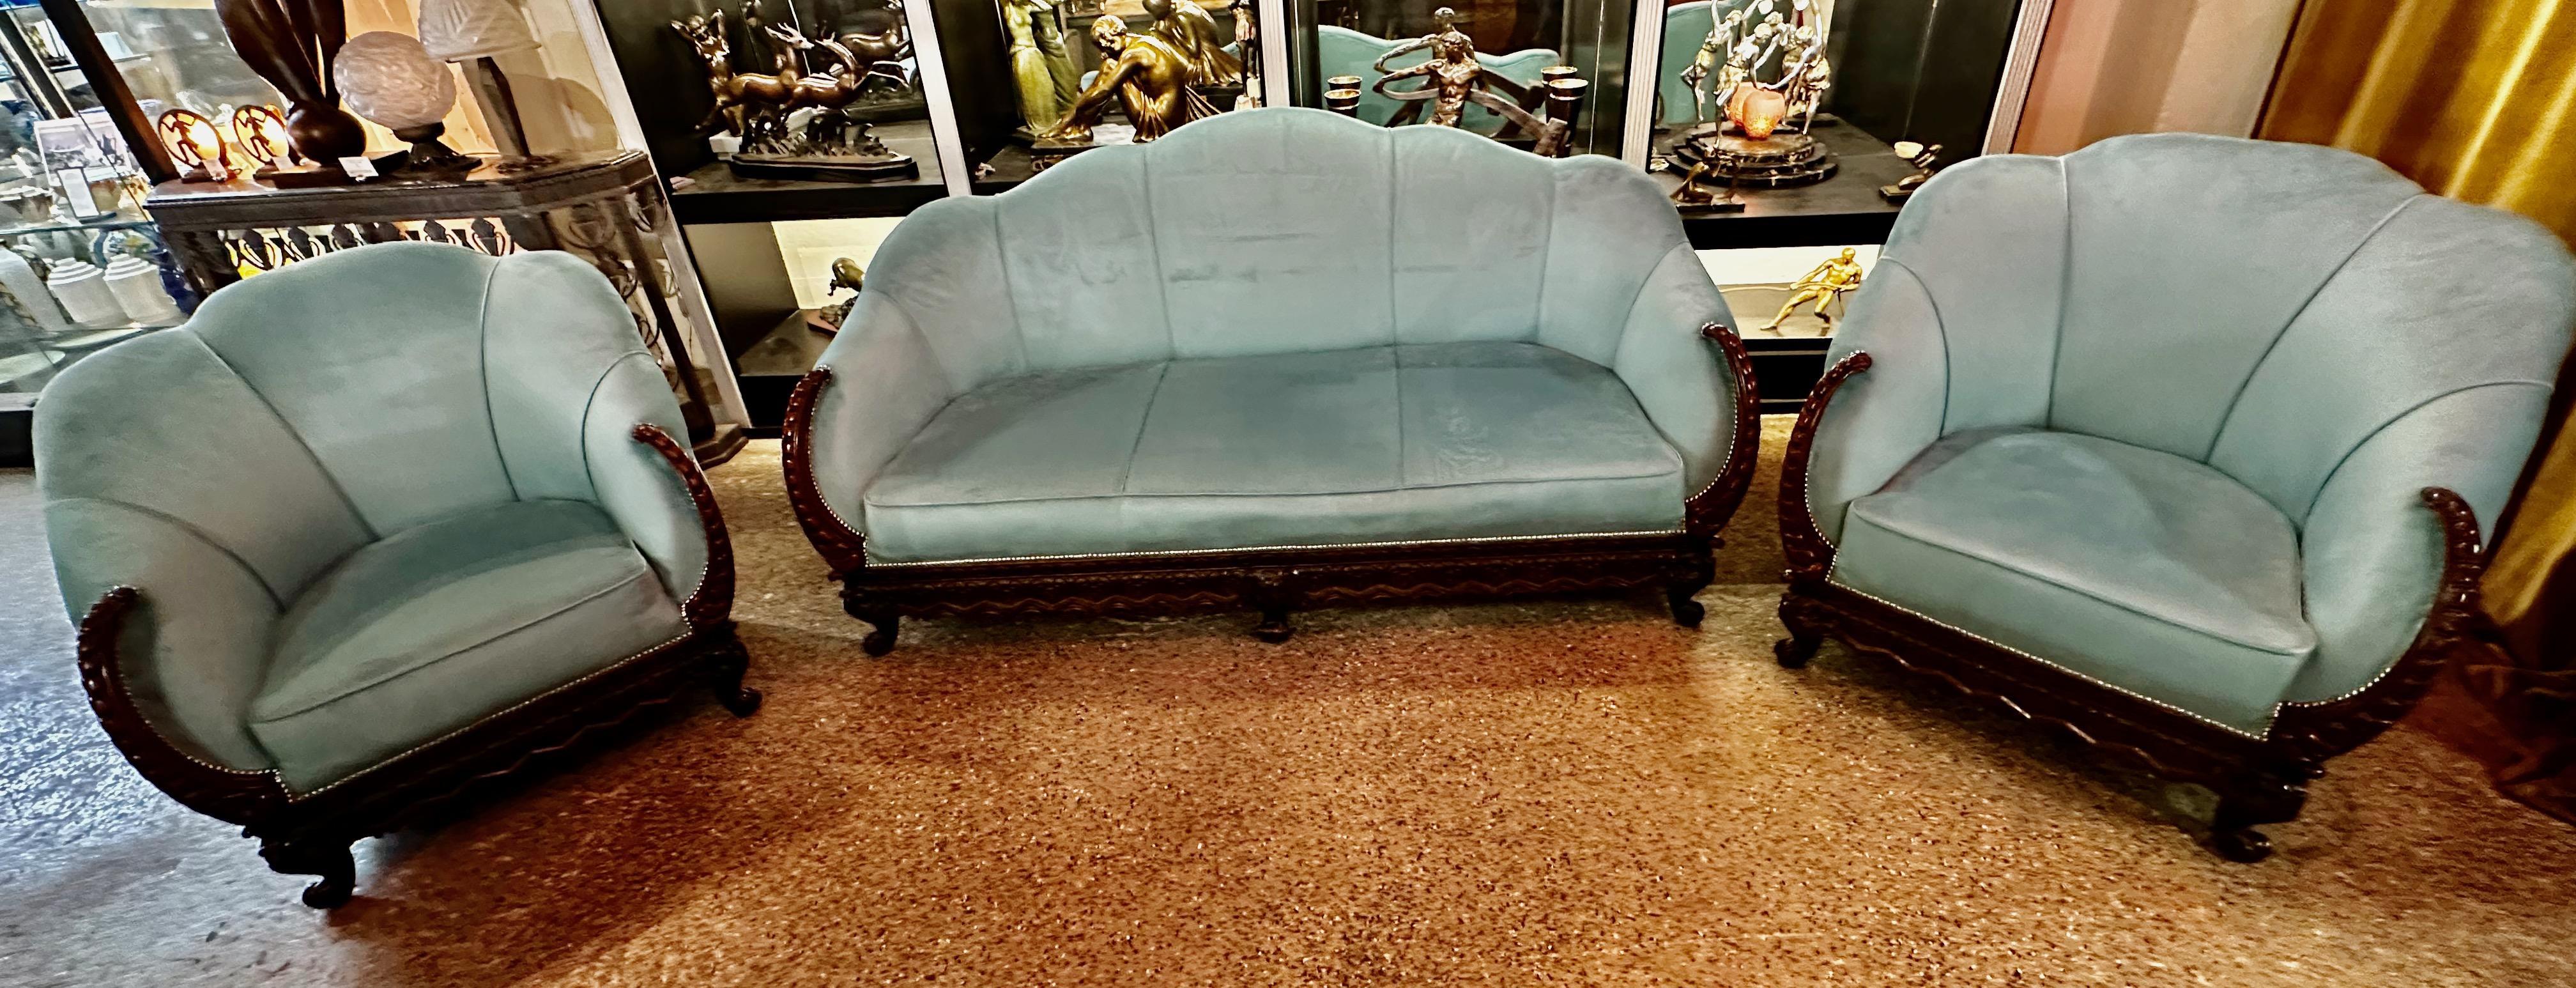 3 Piece Art Deco Sofa Carved Frame. This exquisite Art Deco sofa set showcases a masterful blend of intricate carving and upholstered cloud-like shapes, making it an extraordinary focal point for any sophisticated living space. The frame of each